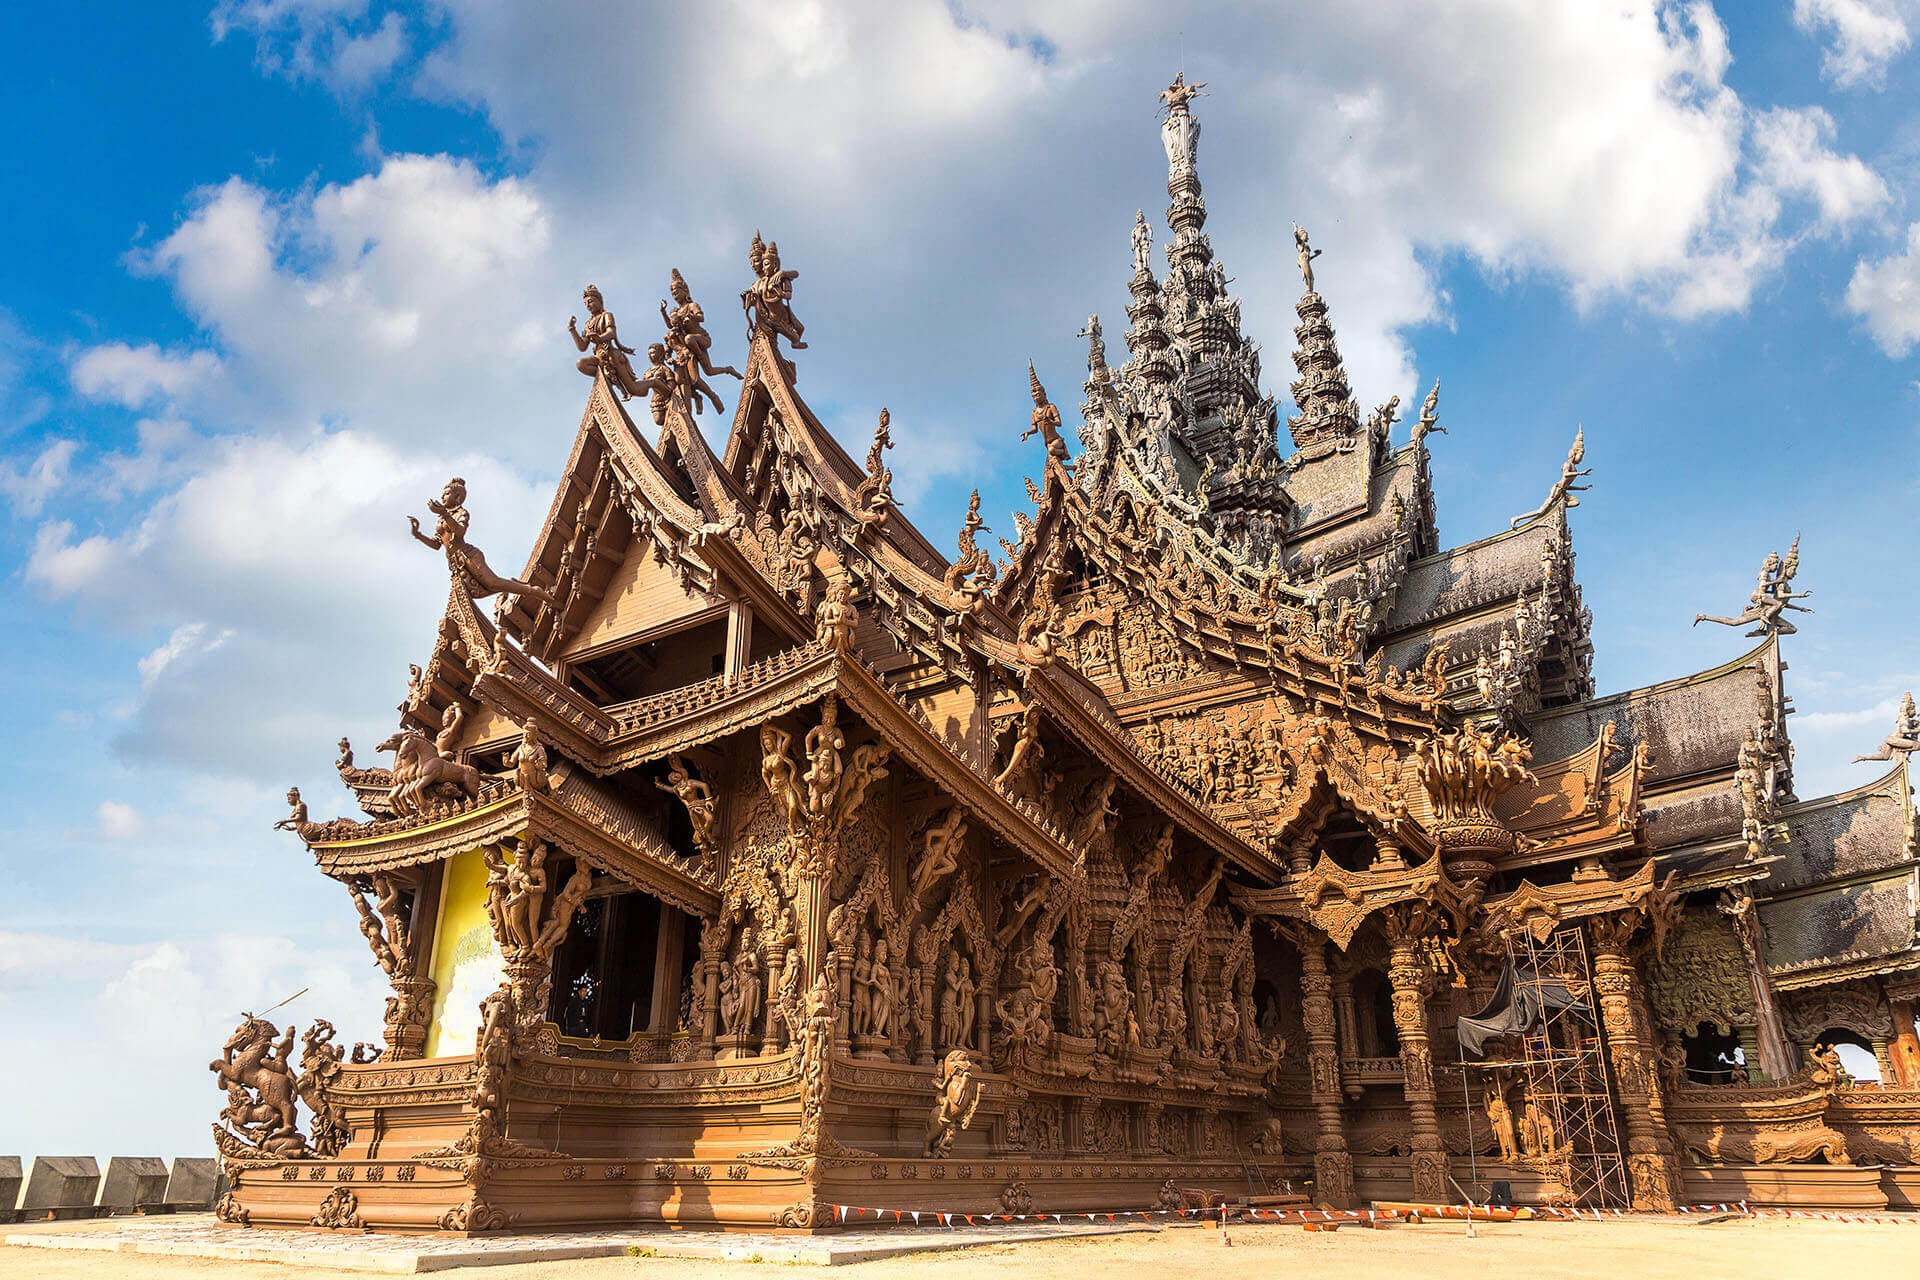 Thailand: Reduced Quarantine Period for Fully Vaccinated Travelers